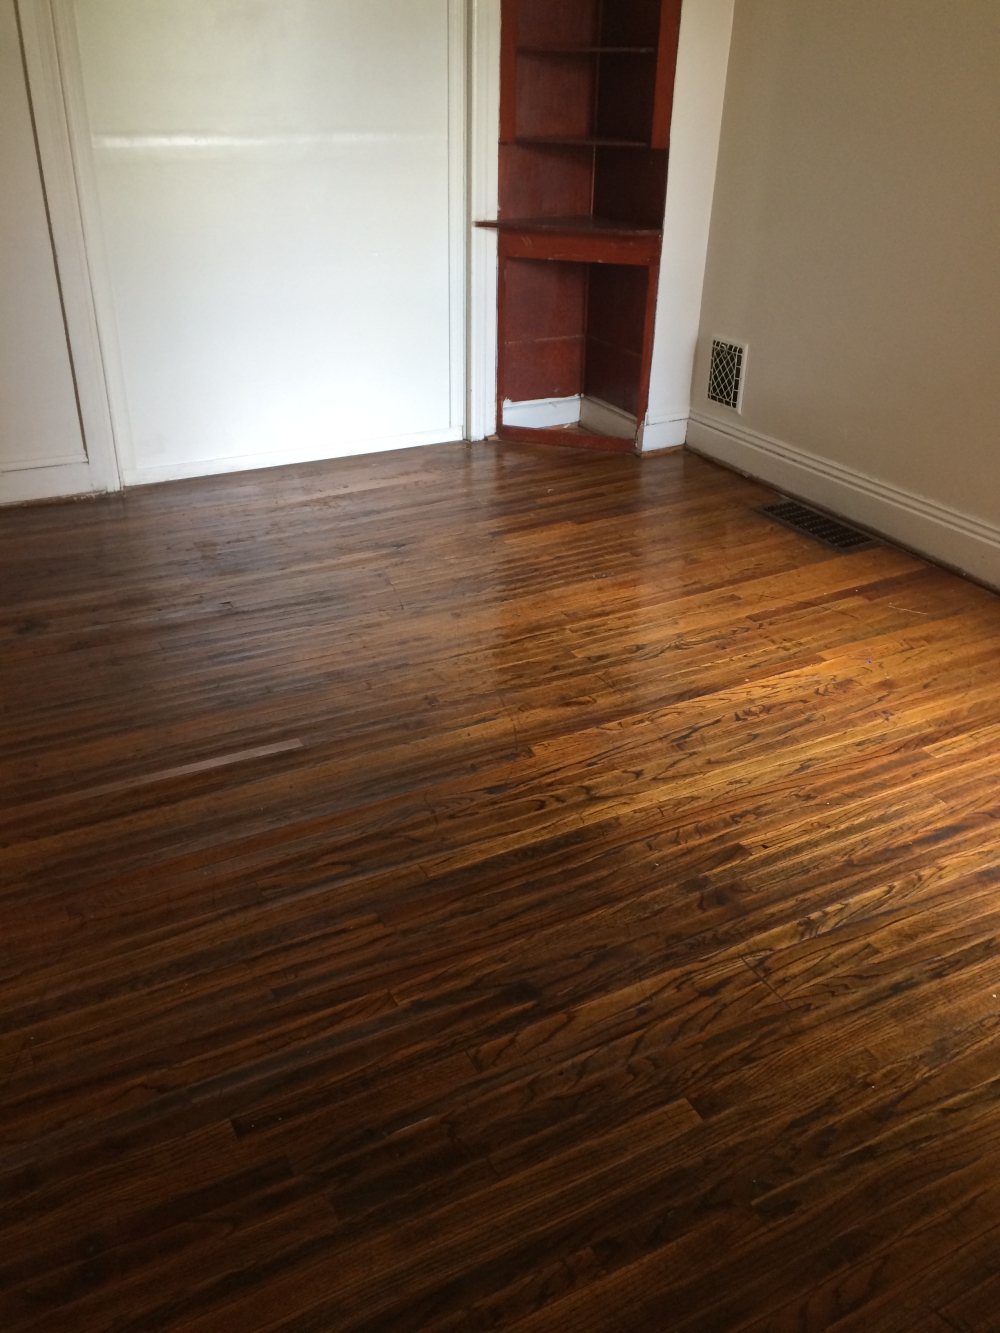 Hardwood floors at YCP off campust housing and apartments